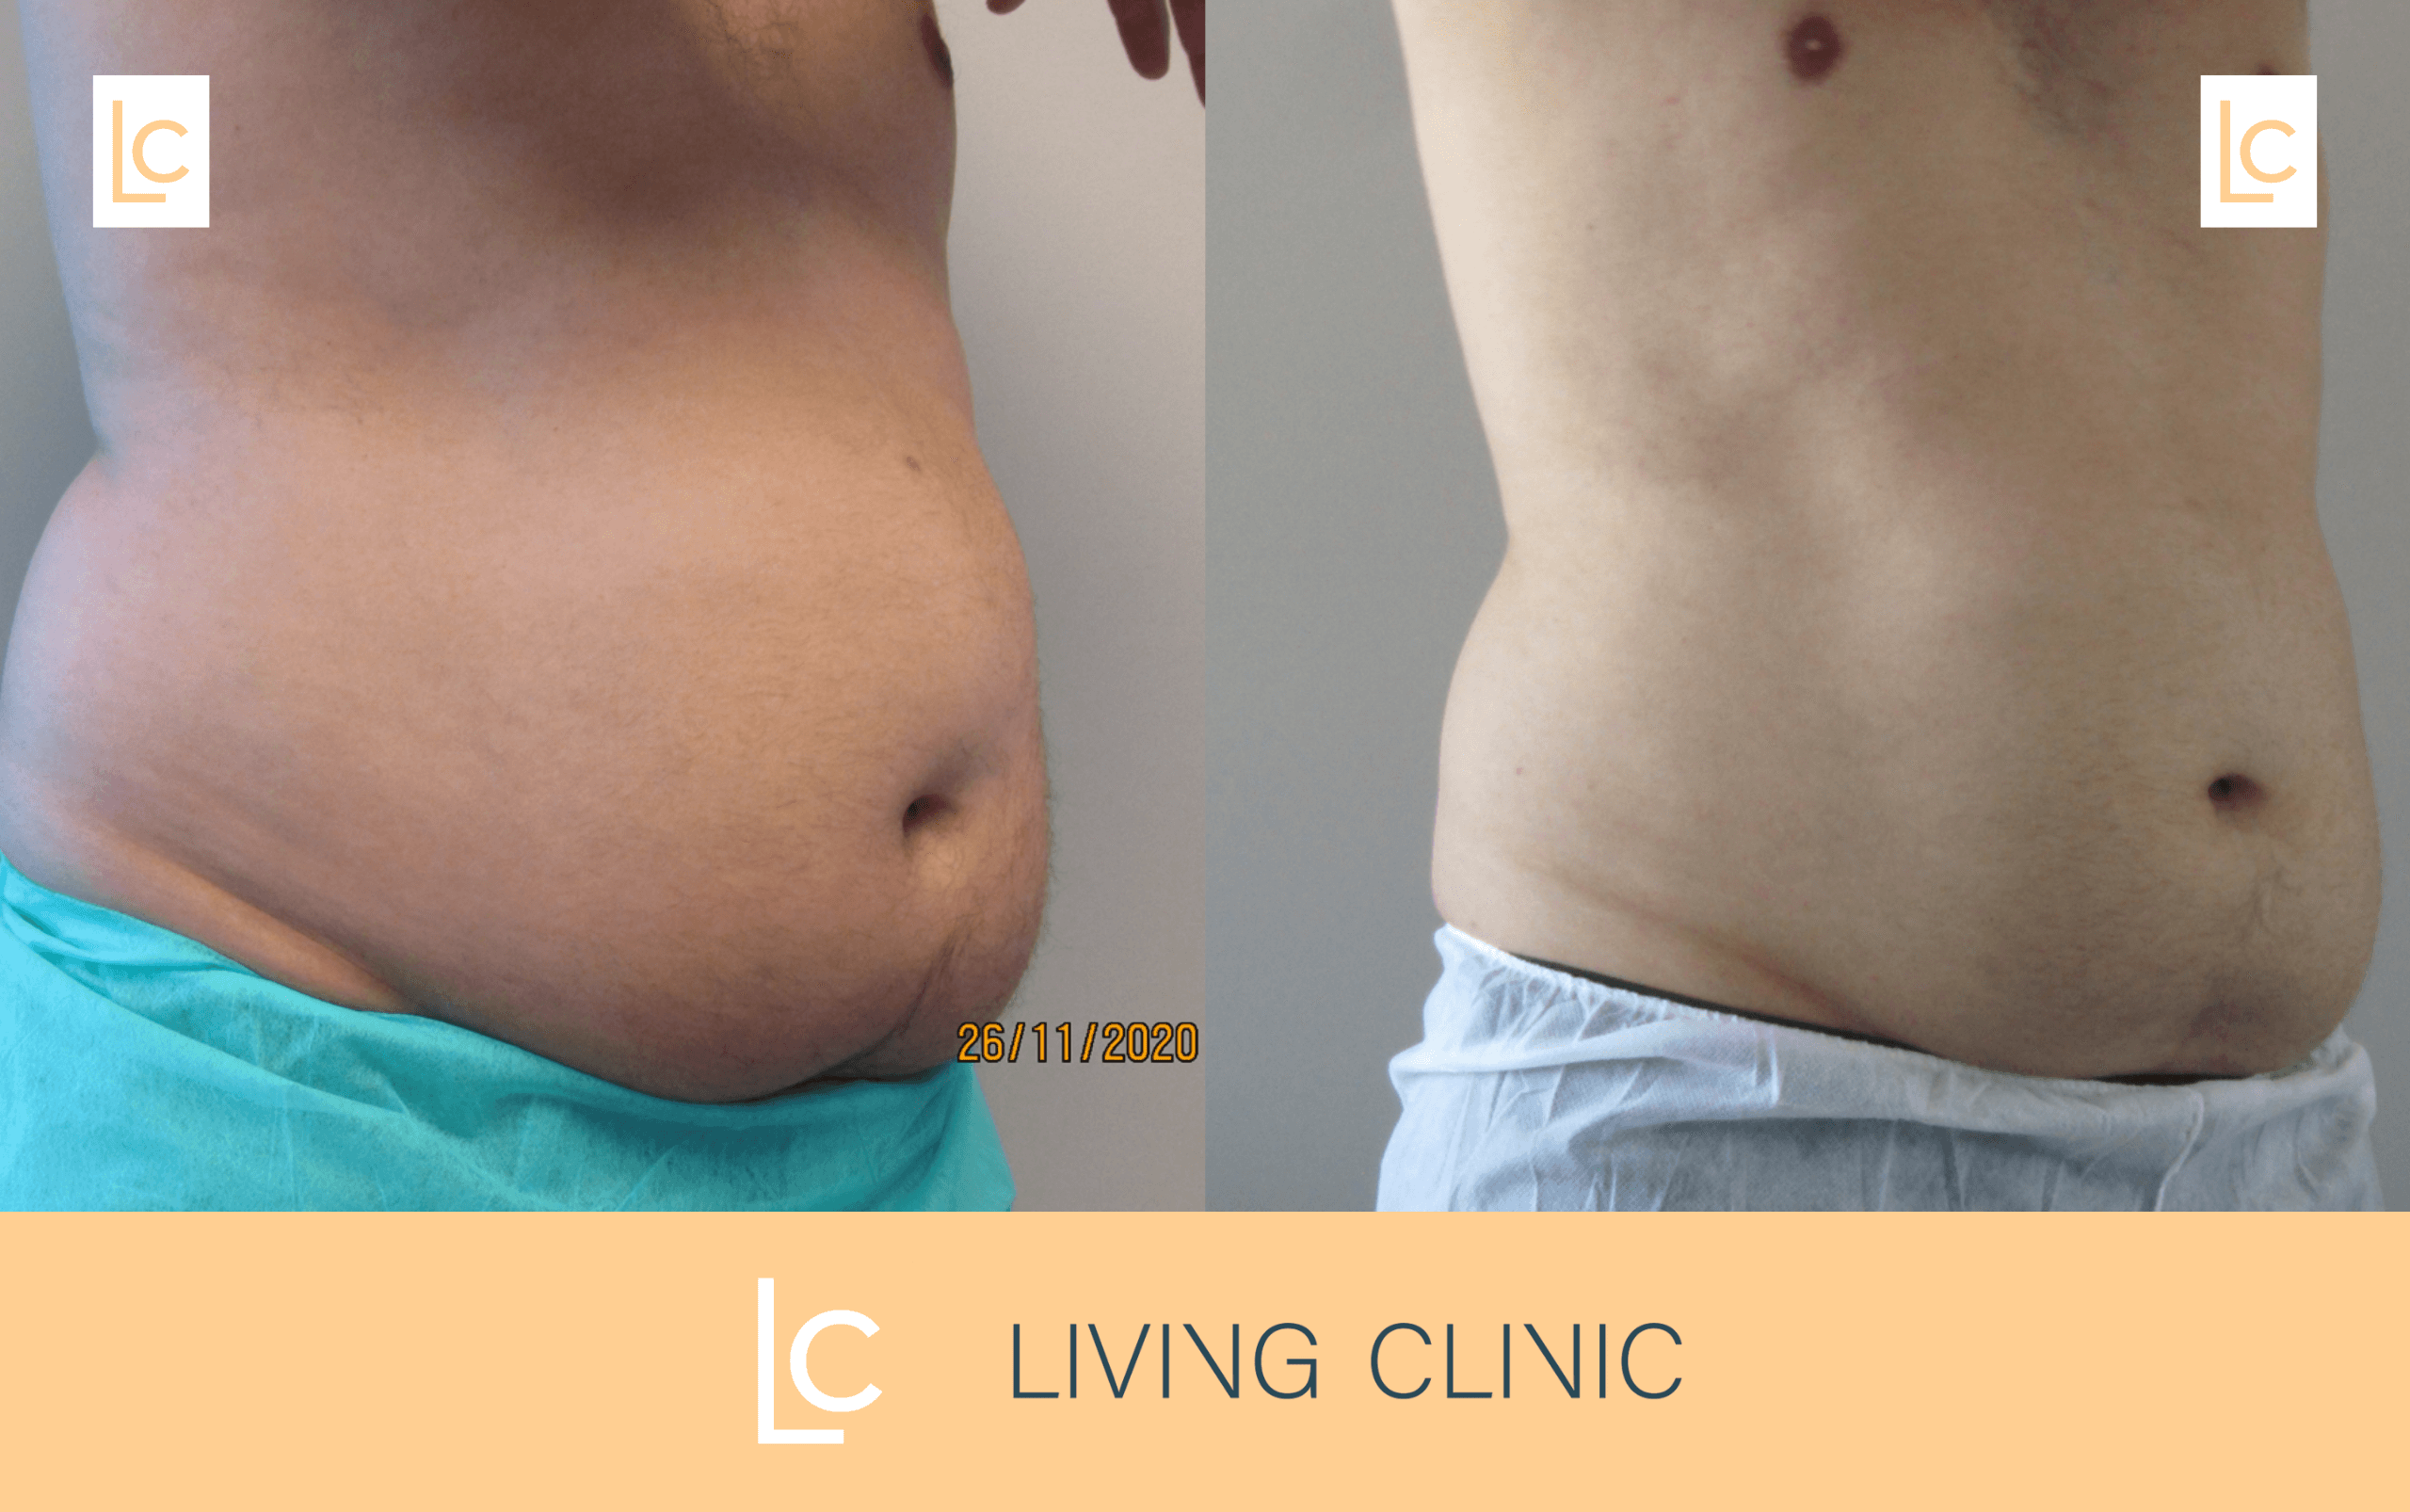 50 year old Male Abdomen Coolsculpting Cryolipolysis Results